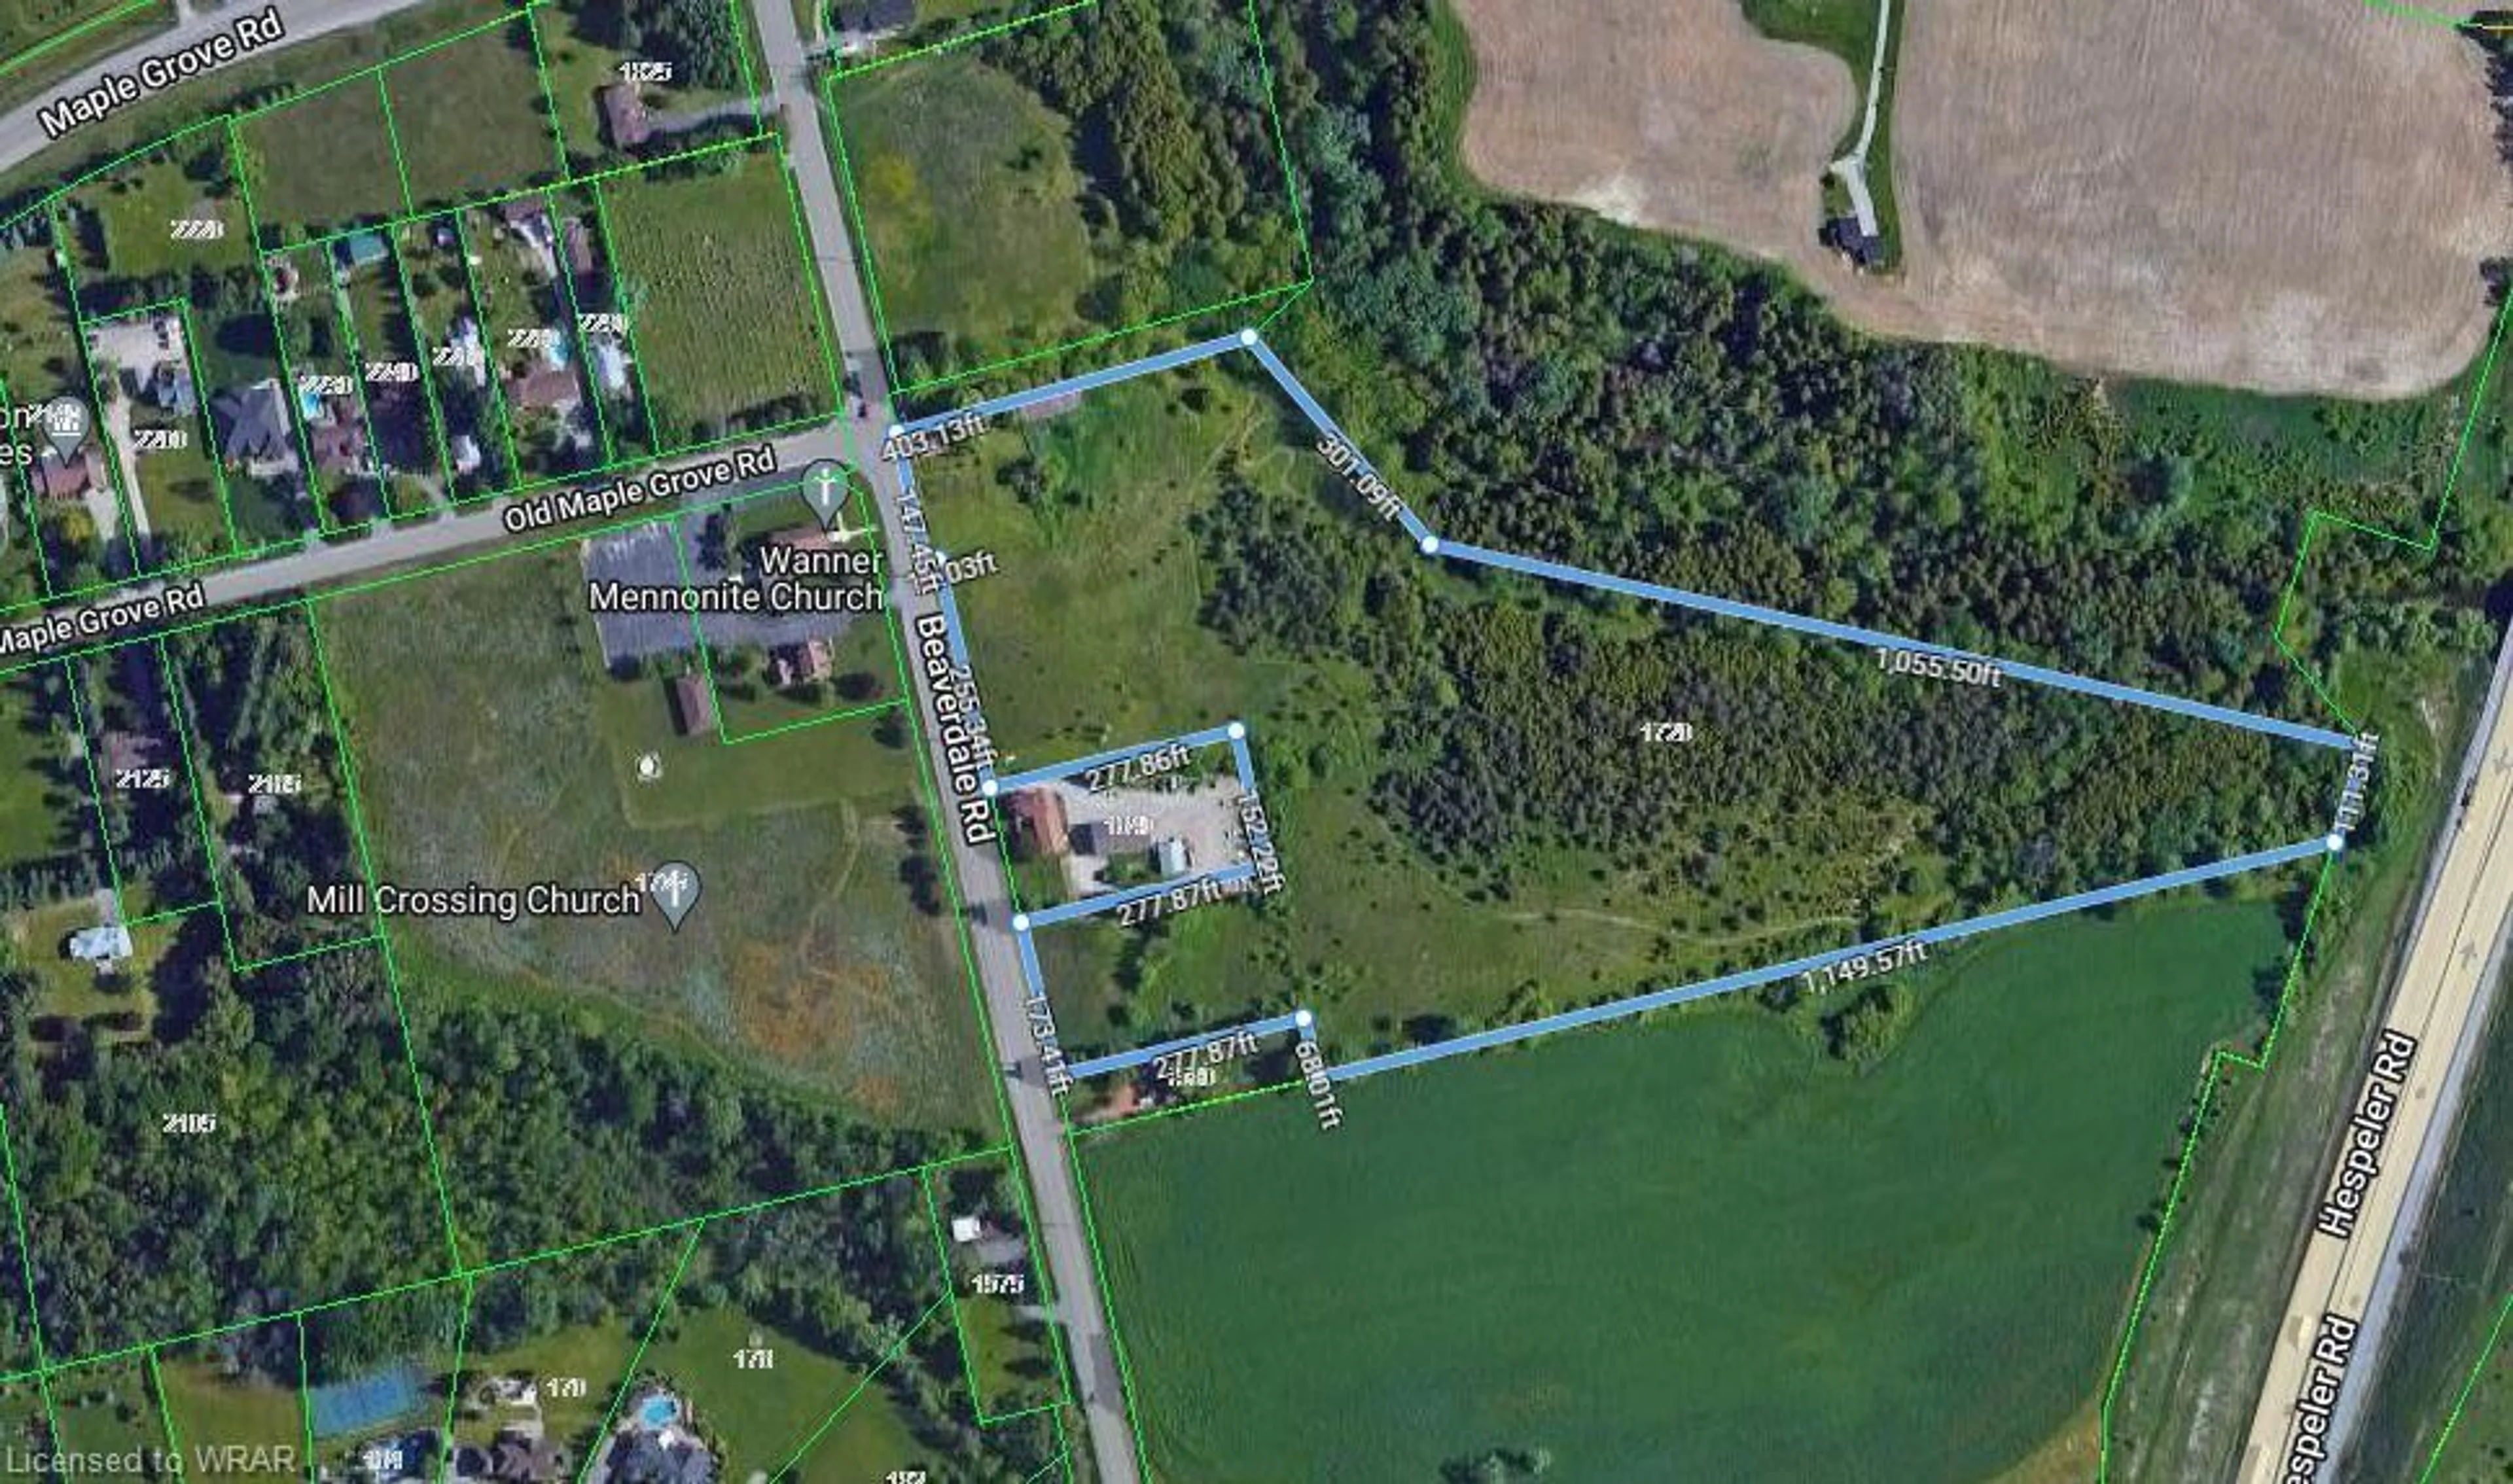 Forest view for 1720 Beaverdale Rd #(15 acres), Cambridge Ontario N3C 2V3